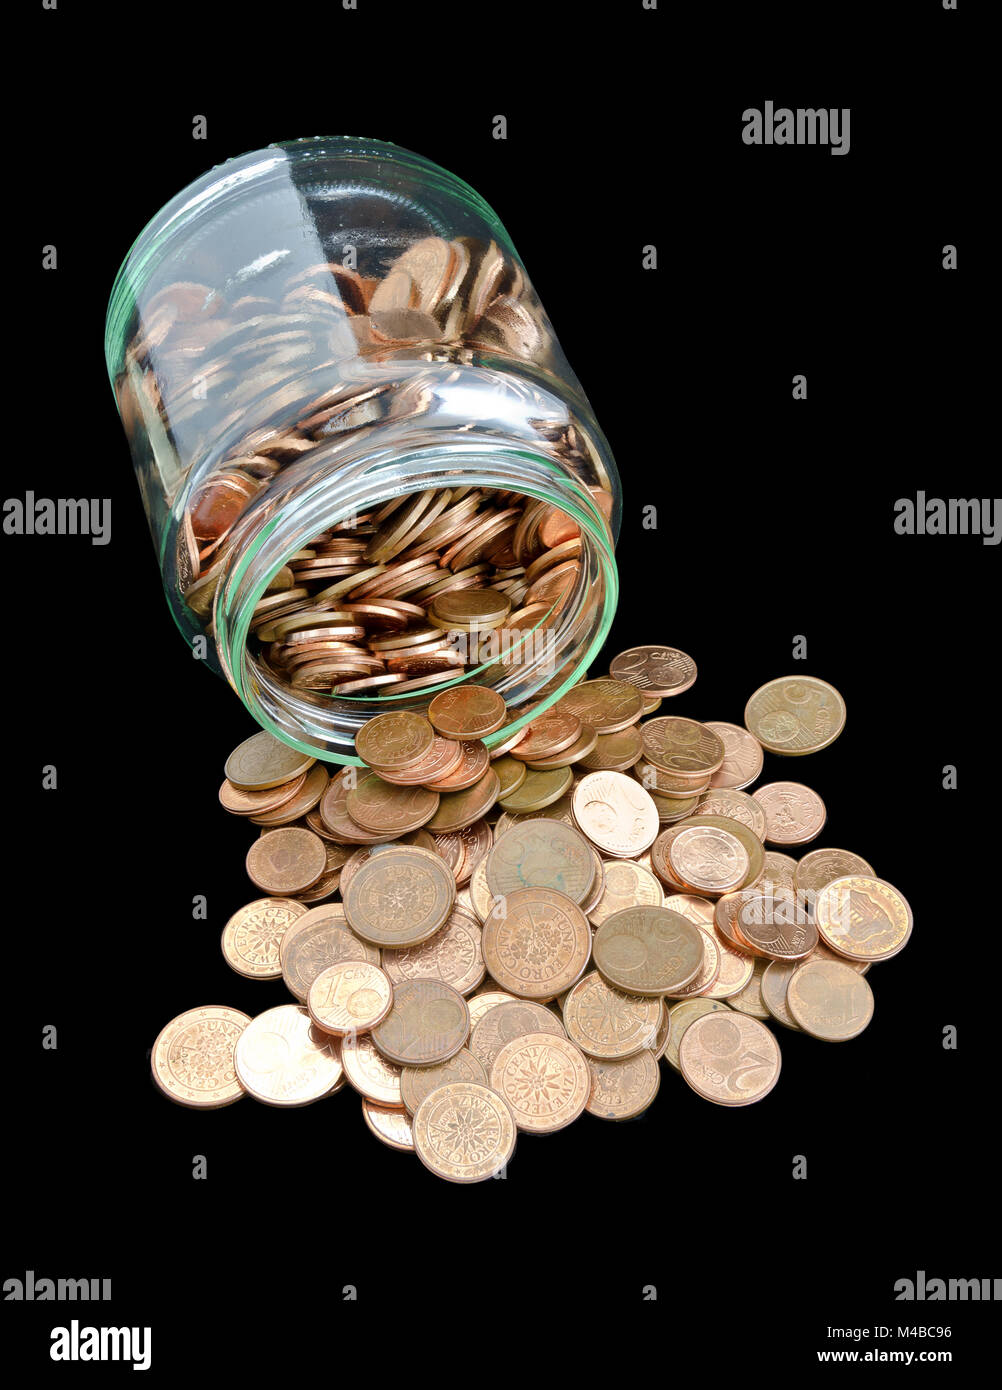 jam jar with poured out Eurocent coins Stock Photo